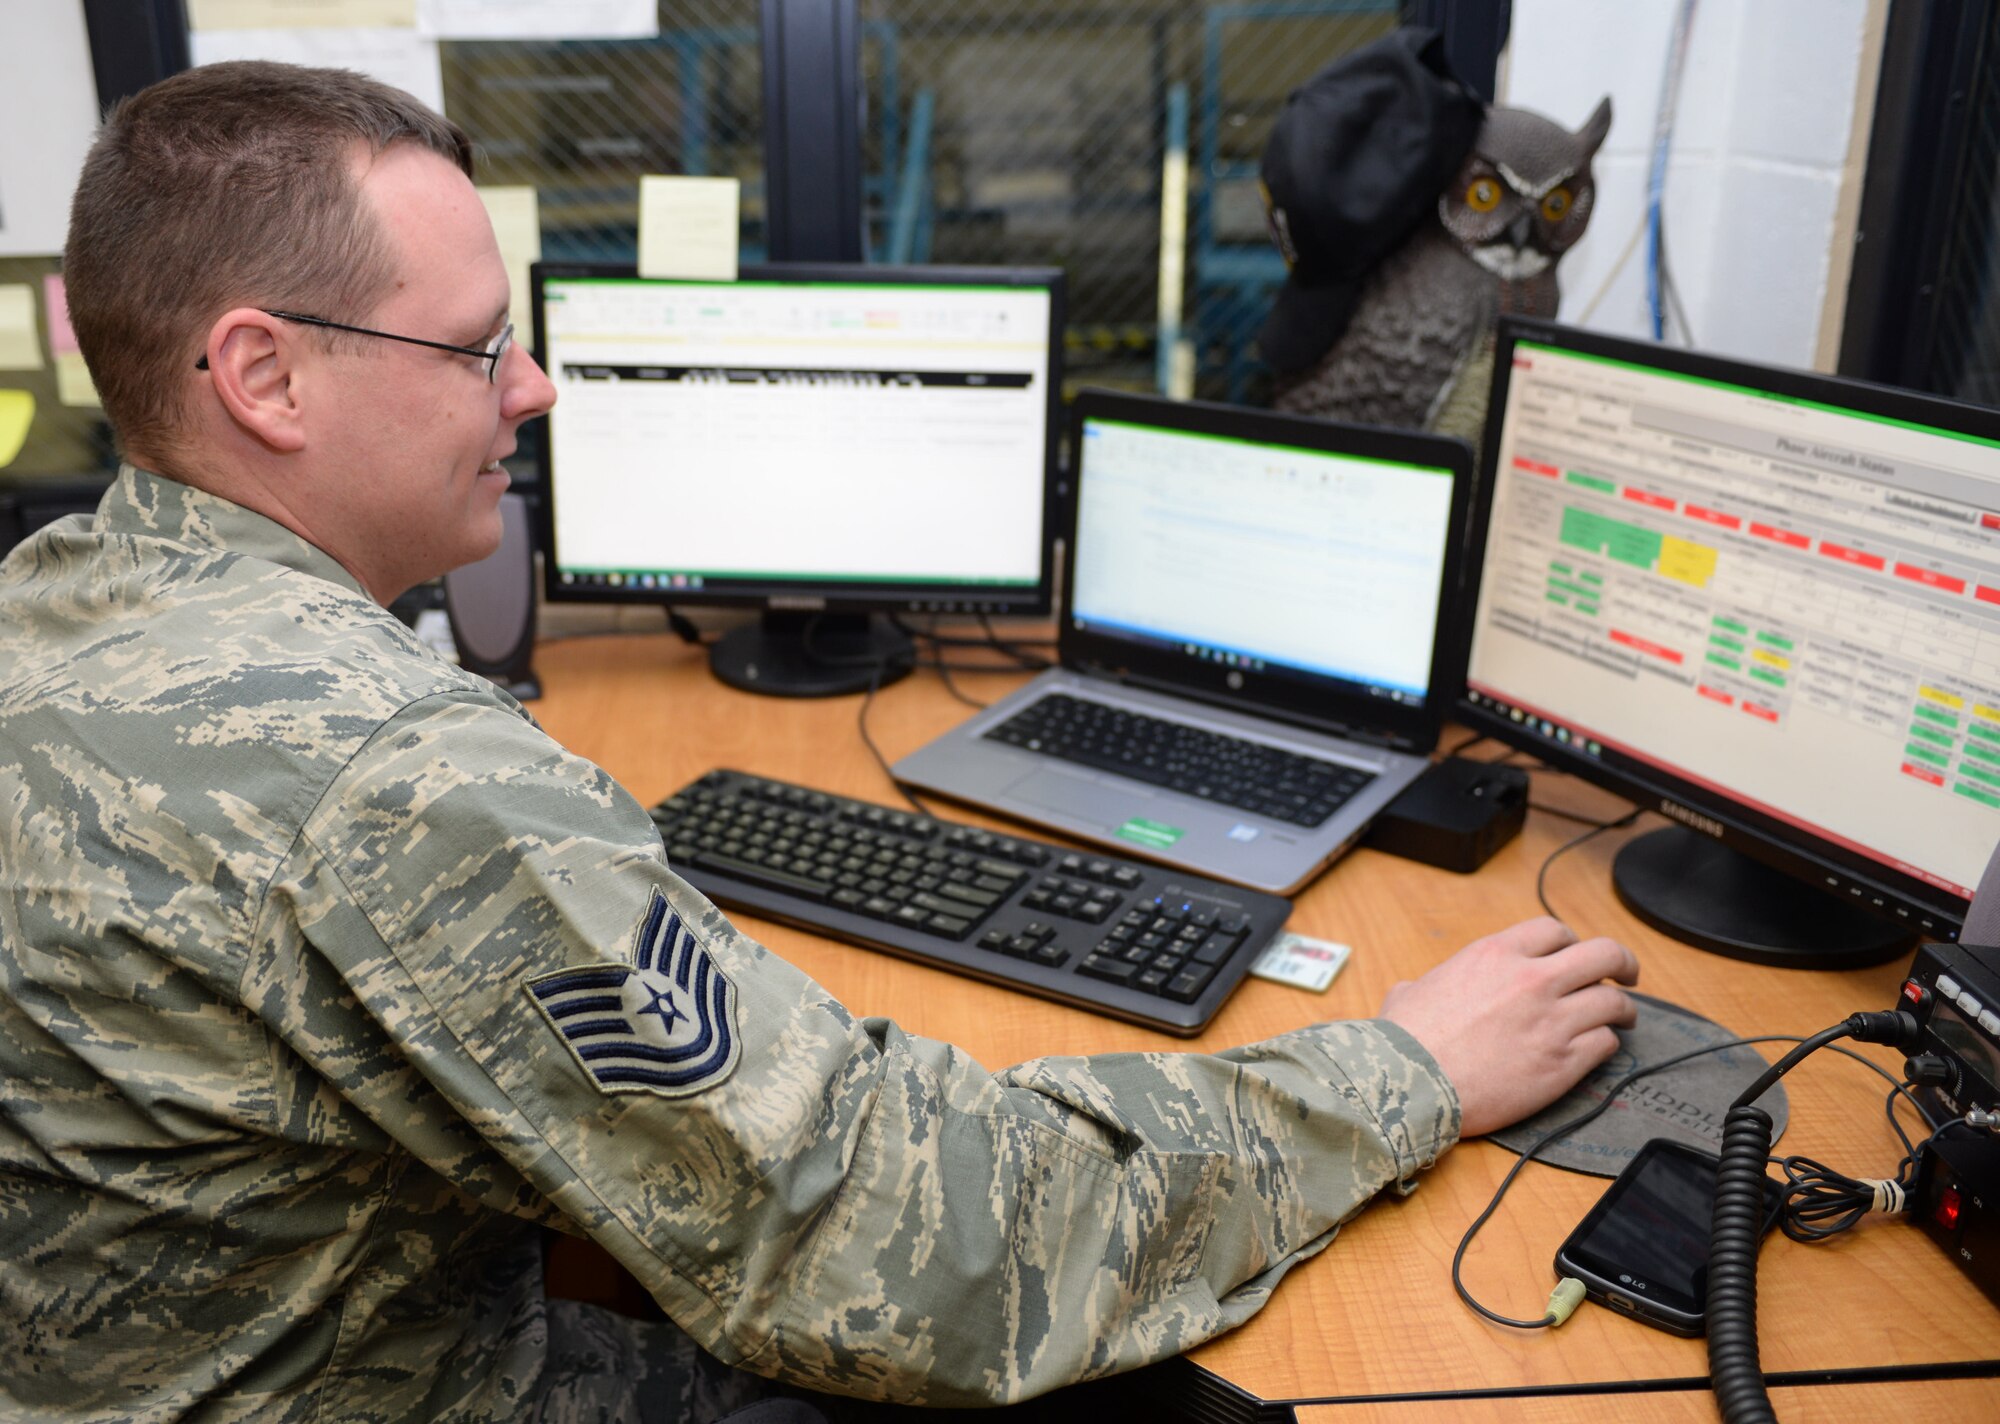 Tech. Sgt. James McCurdy, the phase section monitor assigned to the 28th Maintenance Squadron, looks through his inspection schedule during an 800 flight hour inspection at Ellsworth Air Force Base, S.D., March 8, 2017. During the inspection process, McCurdy is responsible for tracking the scheduled maintenance while establishing Airmen to their respective areas to work on. (U.S. Air Force photo by Airman 1st Class Denise M. Jenson)